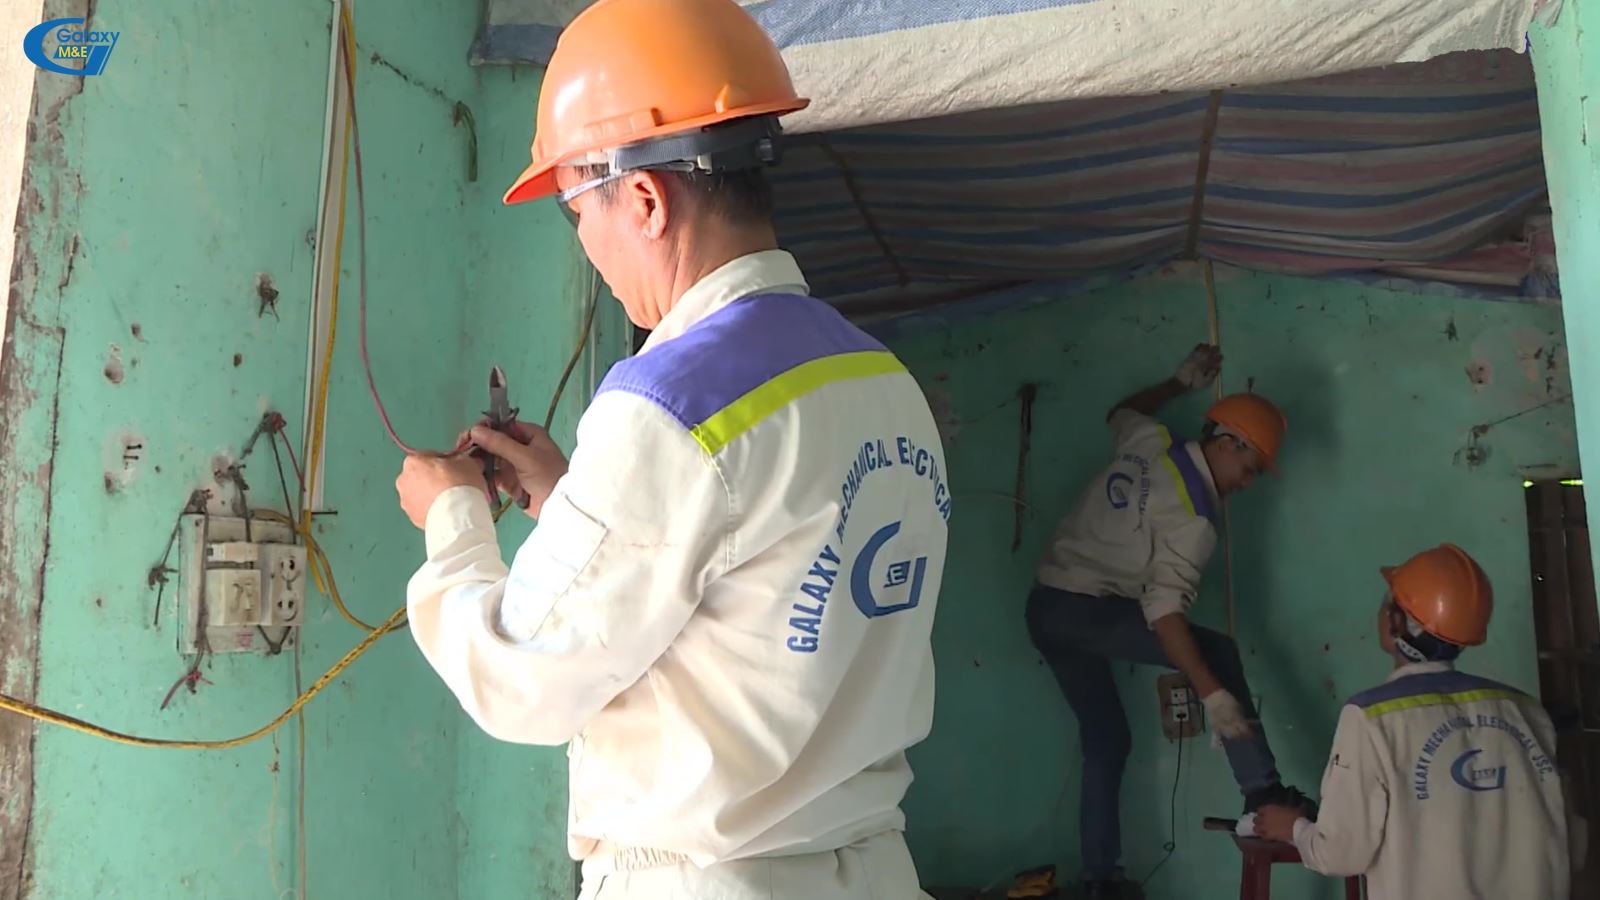 Galaxy M&E officials participated in repairing and upgrading the electrical system for people in Cam Hai, Cam Pha city, Quang Ninh province.